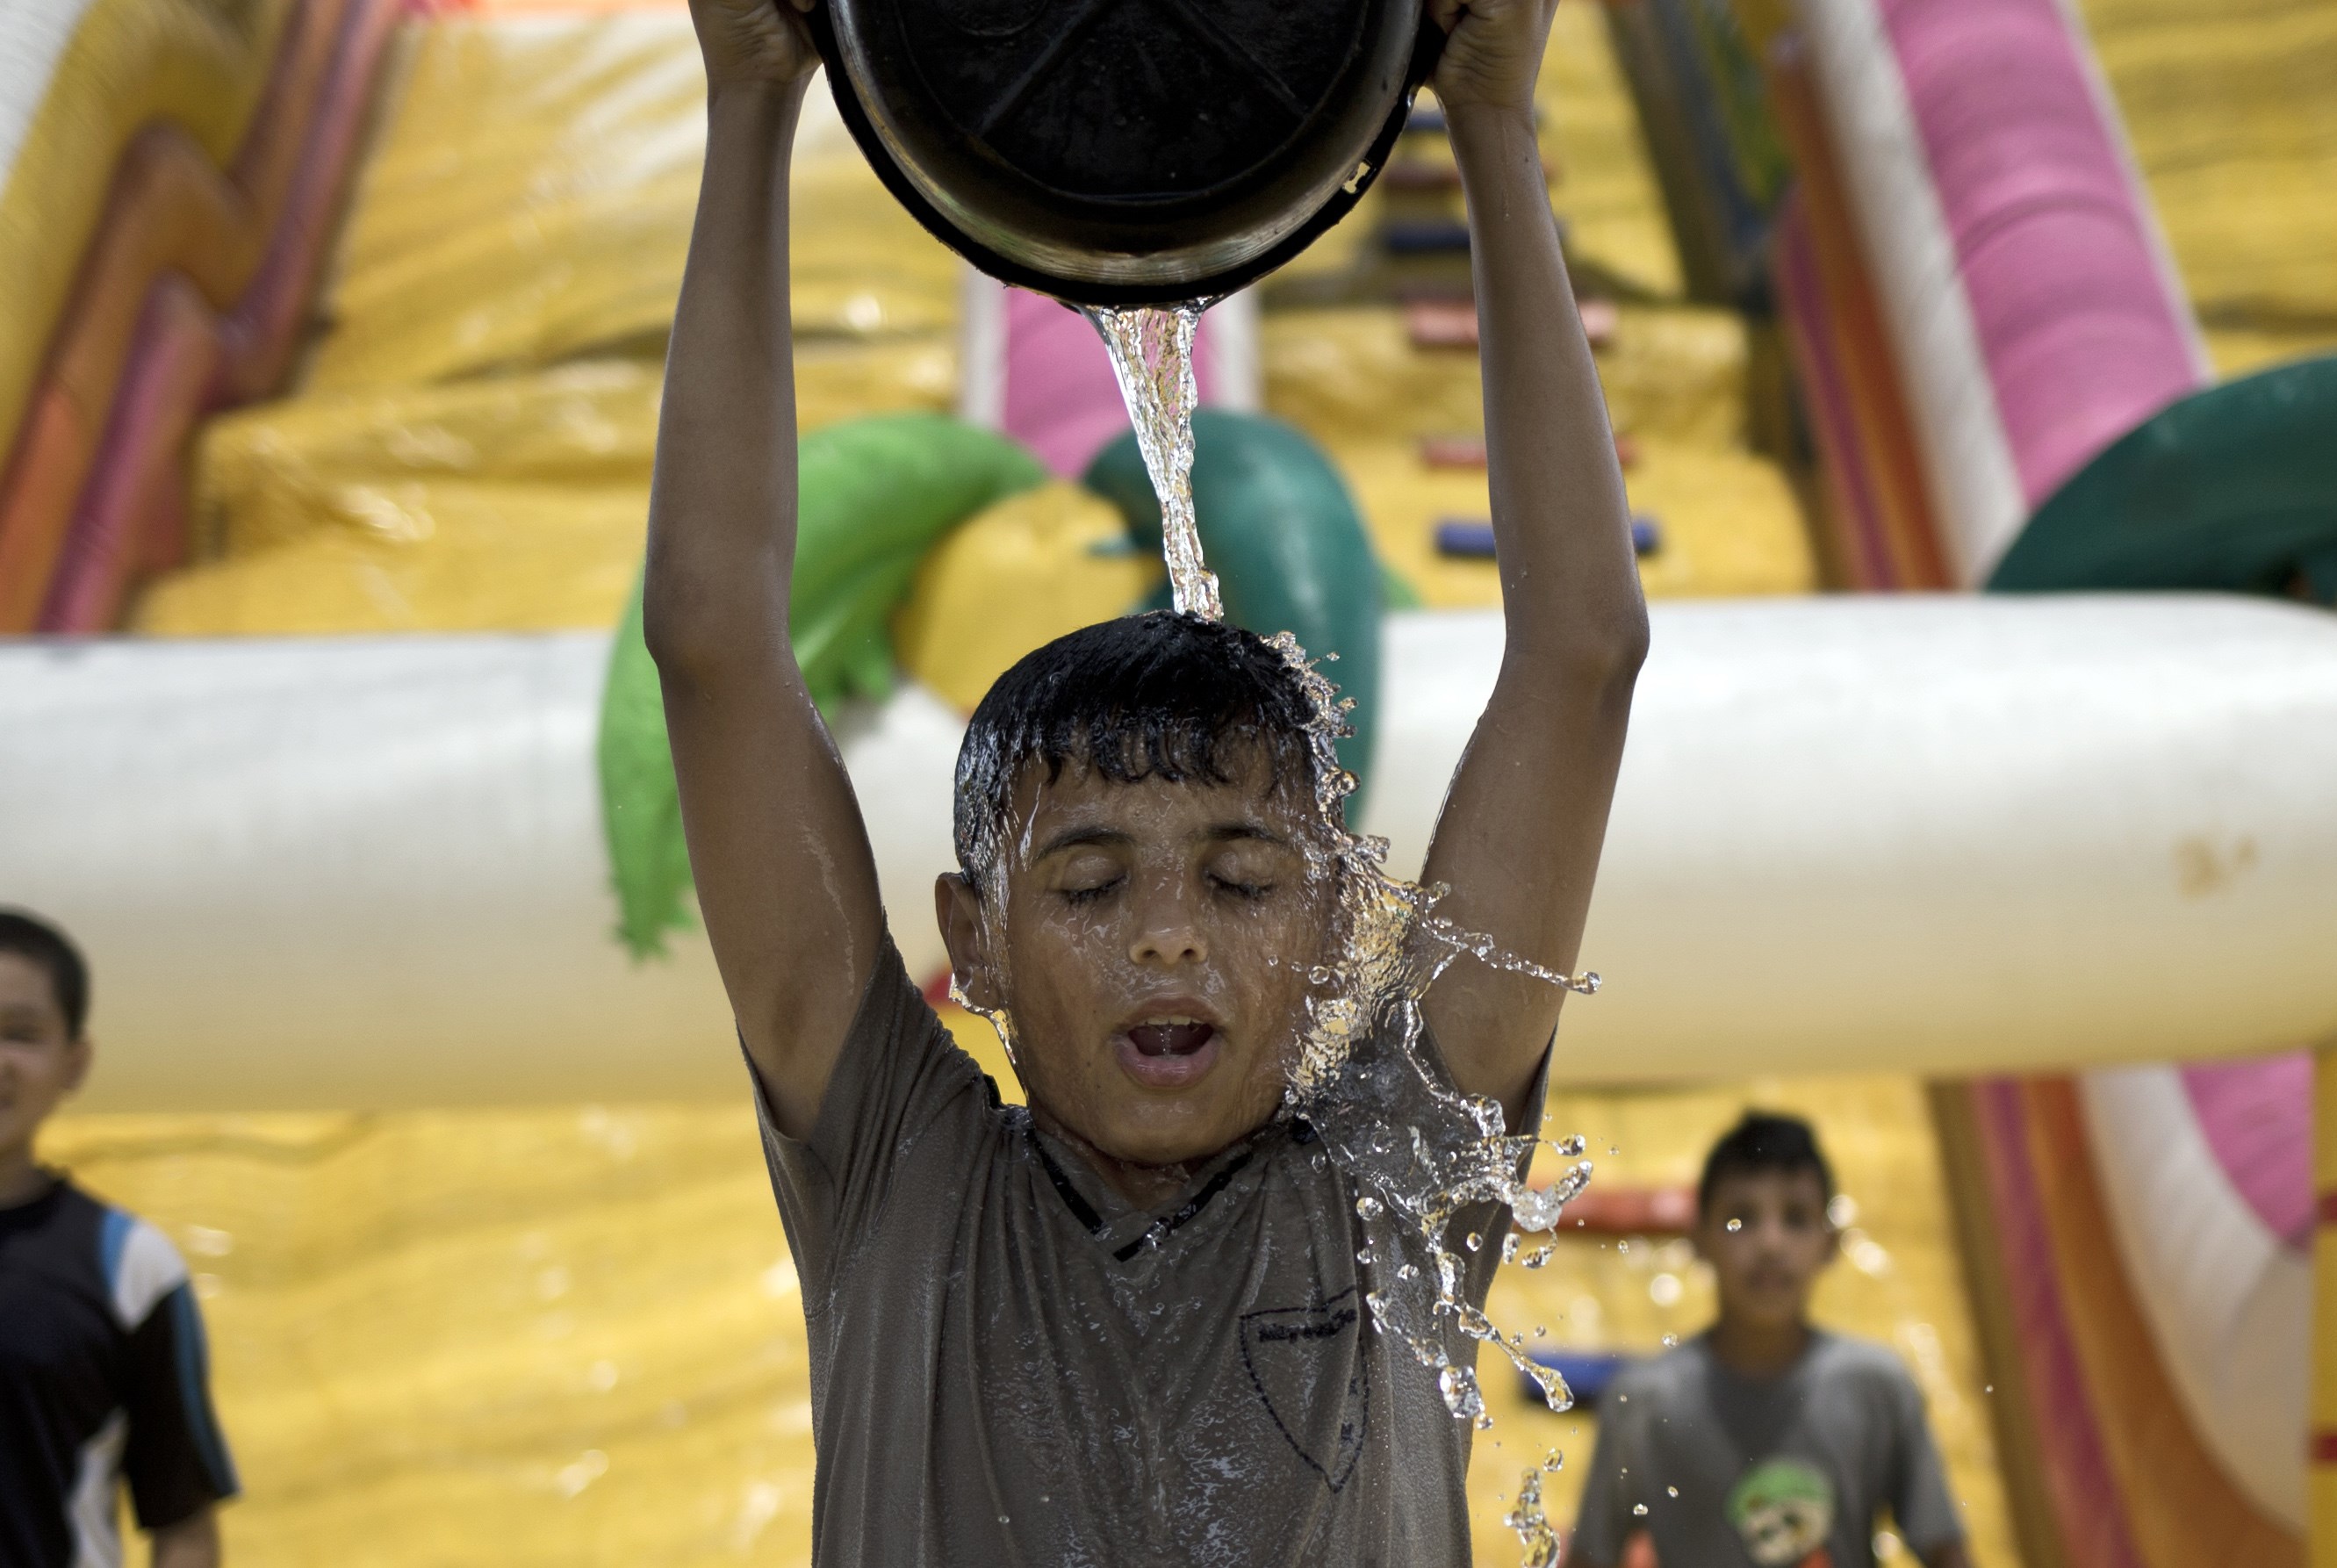 A Palestinian boy empties a bucket of water on his head in Gaza City on Aug. 3, 2015, during a sweltering heat wave. (Mohammed Abed—AFP/Getty Images)